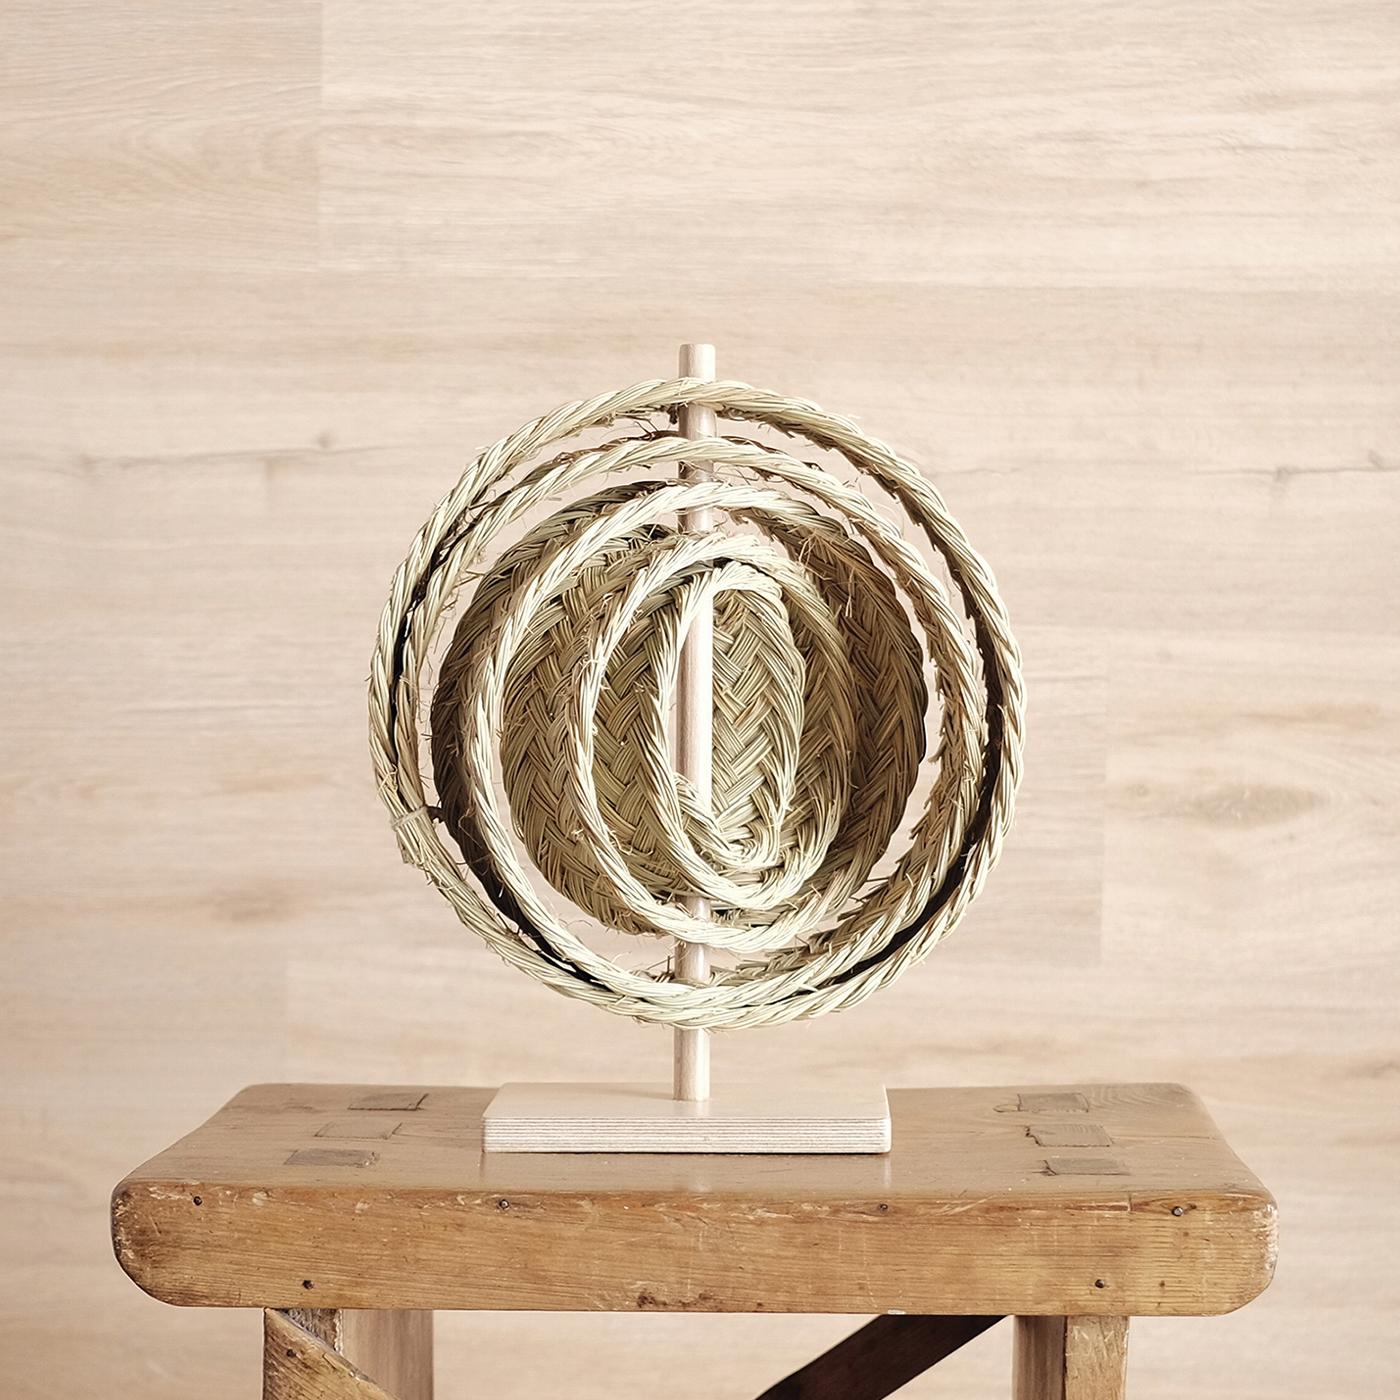 An organic modern sculpture crafted with vegetable fibers crafted in Spain by Gabriela de Sagarminaga. Inspired by the idea of circularity of life, this sculpture was born from the interest in the lightness of the castings. It is produced with